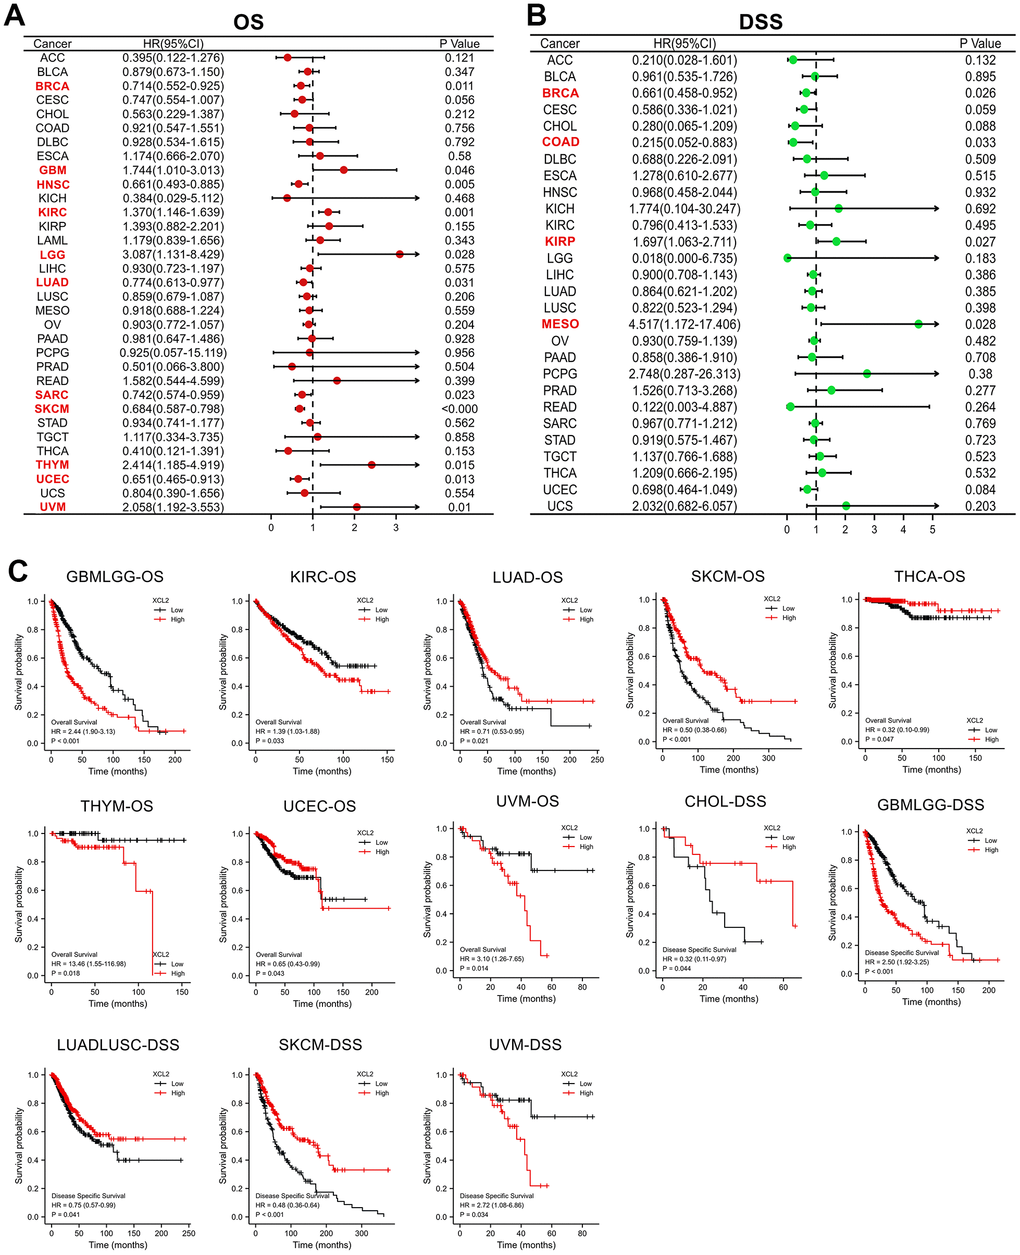 The univariate Cox regression and Kaplan–Meier survival analyses of XCL2 in pan-cancer. (A) The relationship between XCL2 expression levels and OS in various cancer types through single variate Cox regression analysis using TCGA database; (B) The relationship between XCL2 expression levels and DSS in various cancer types through single variate Cox regression analysis using TCGA database; (C) Kaplan–Meier analysis of the association between XCL2 expression and OS/DSS.